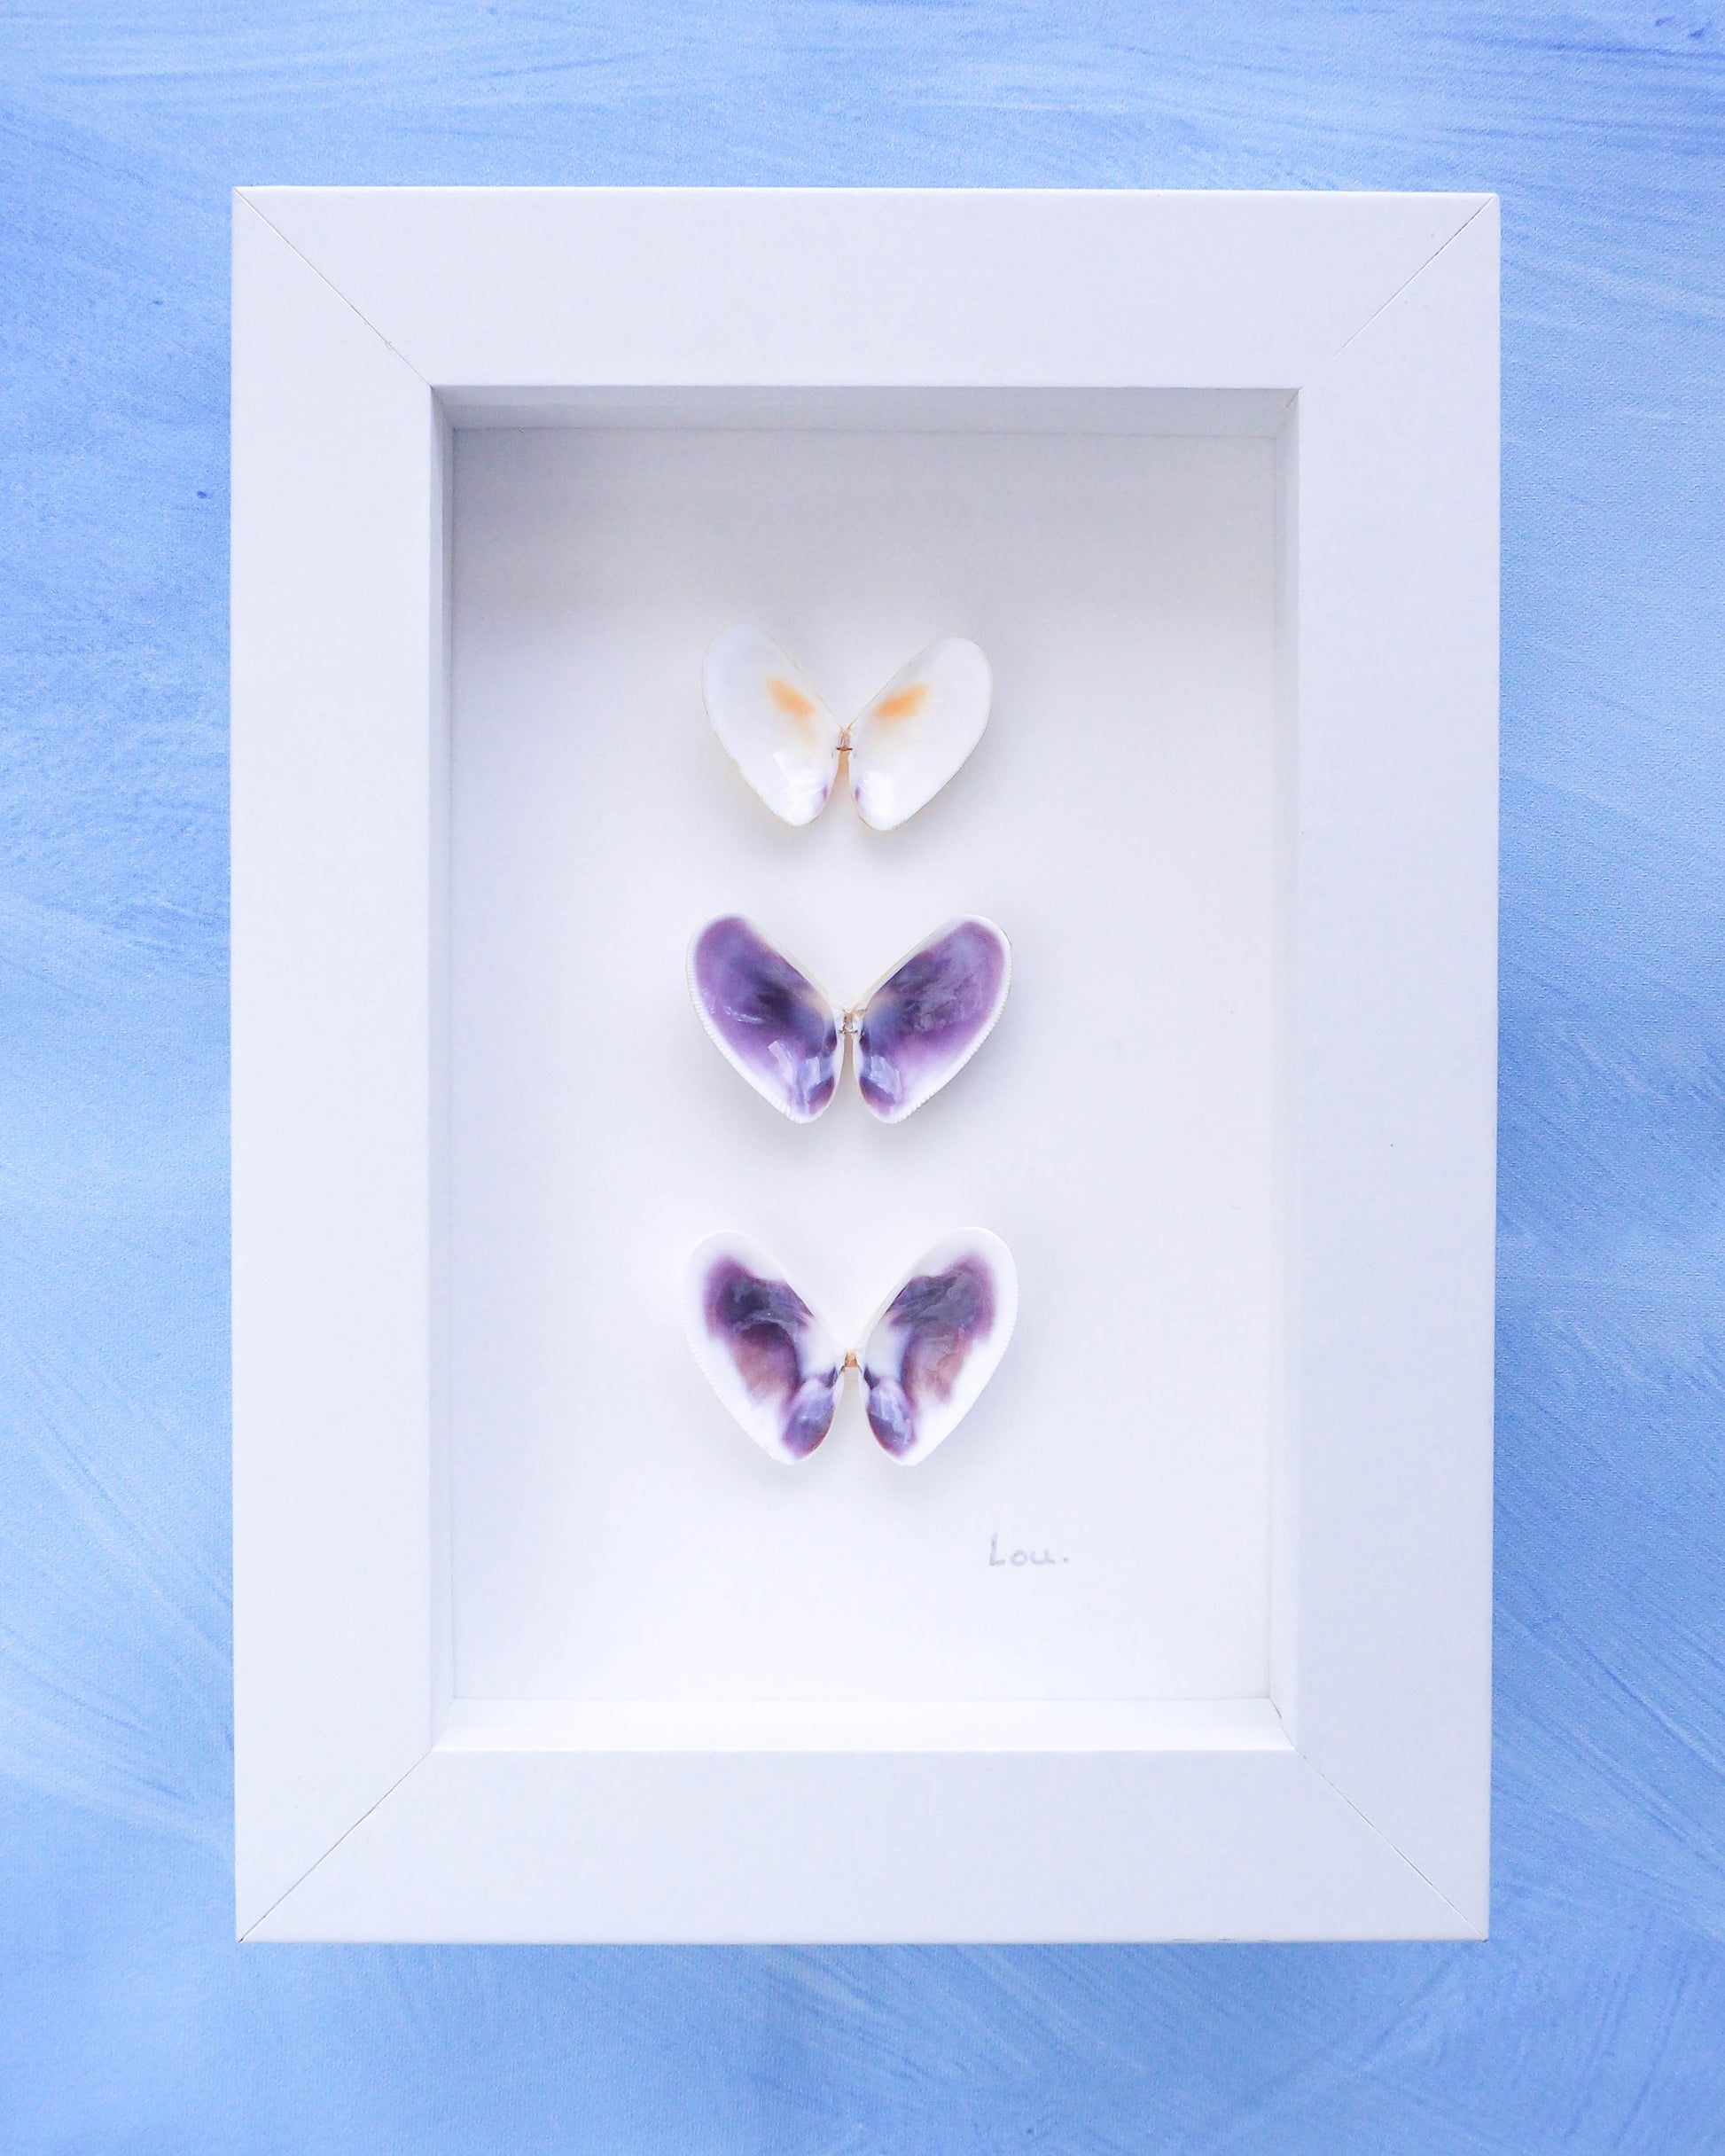 Coastal shell decor, artwork with shells, Seashell butterflies, Shell butterfly art from Portugal, Coquina butterfly artwork, seabylou, Sea by Lou 